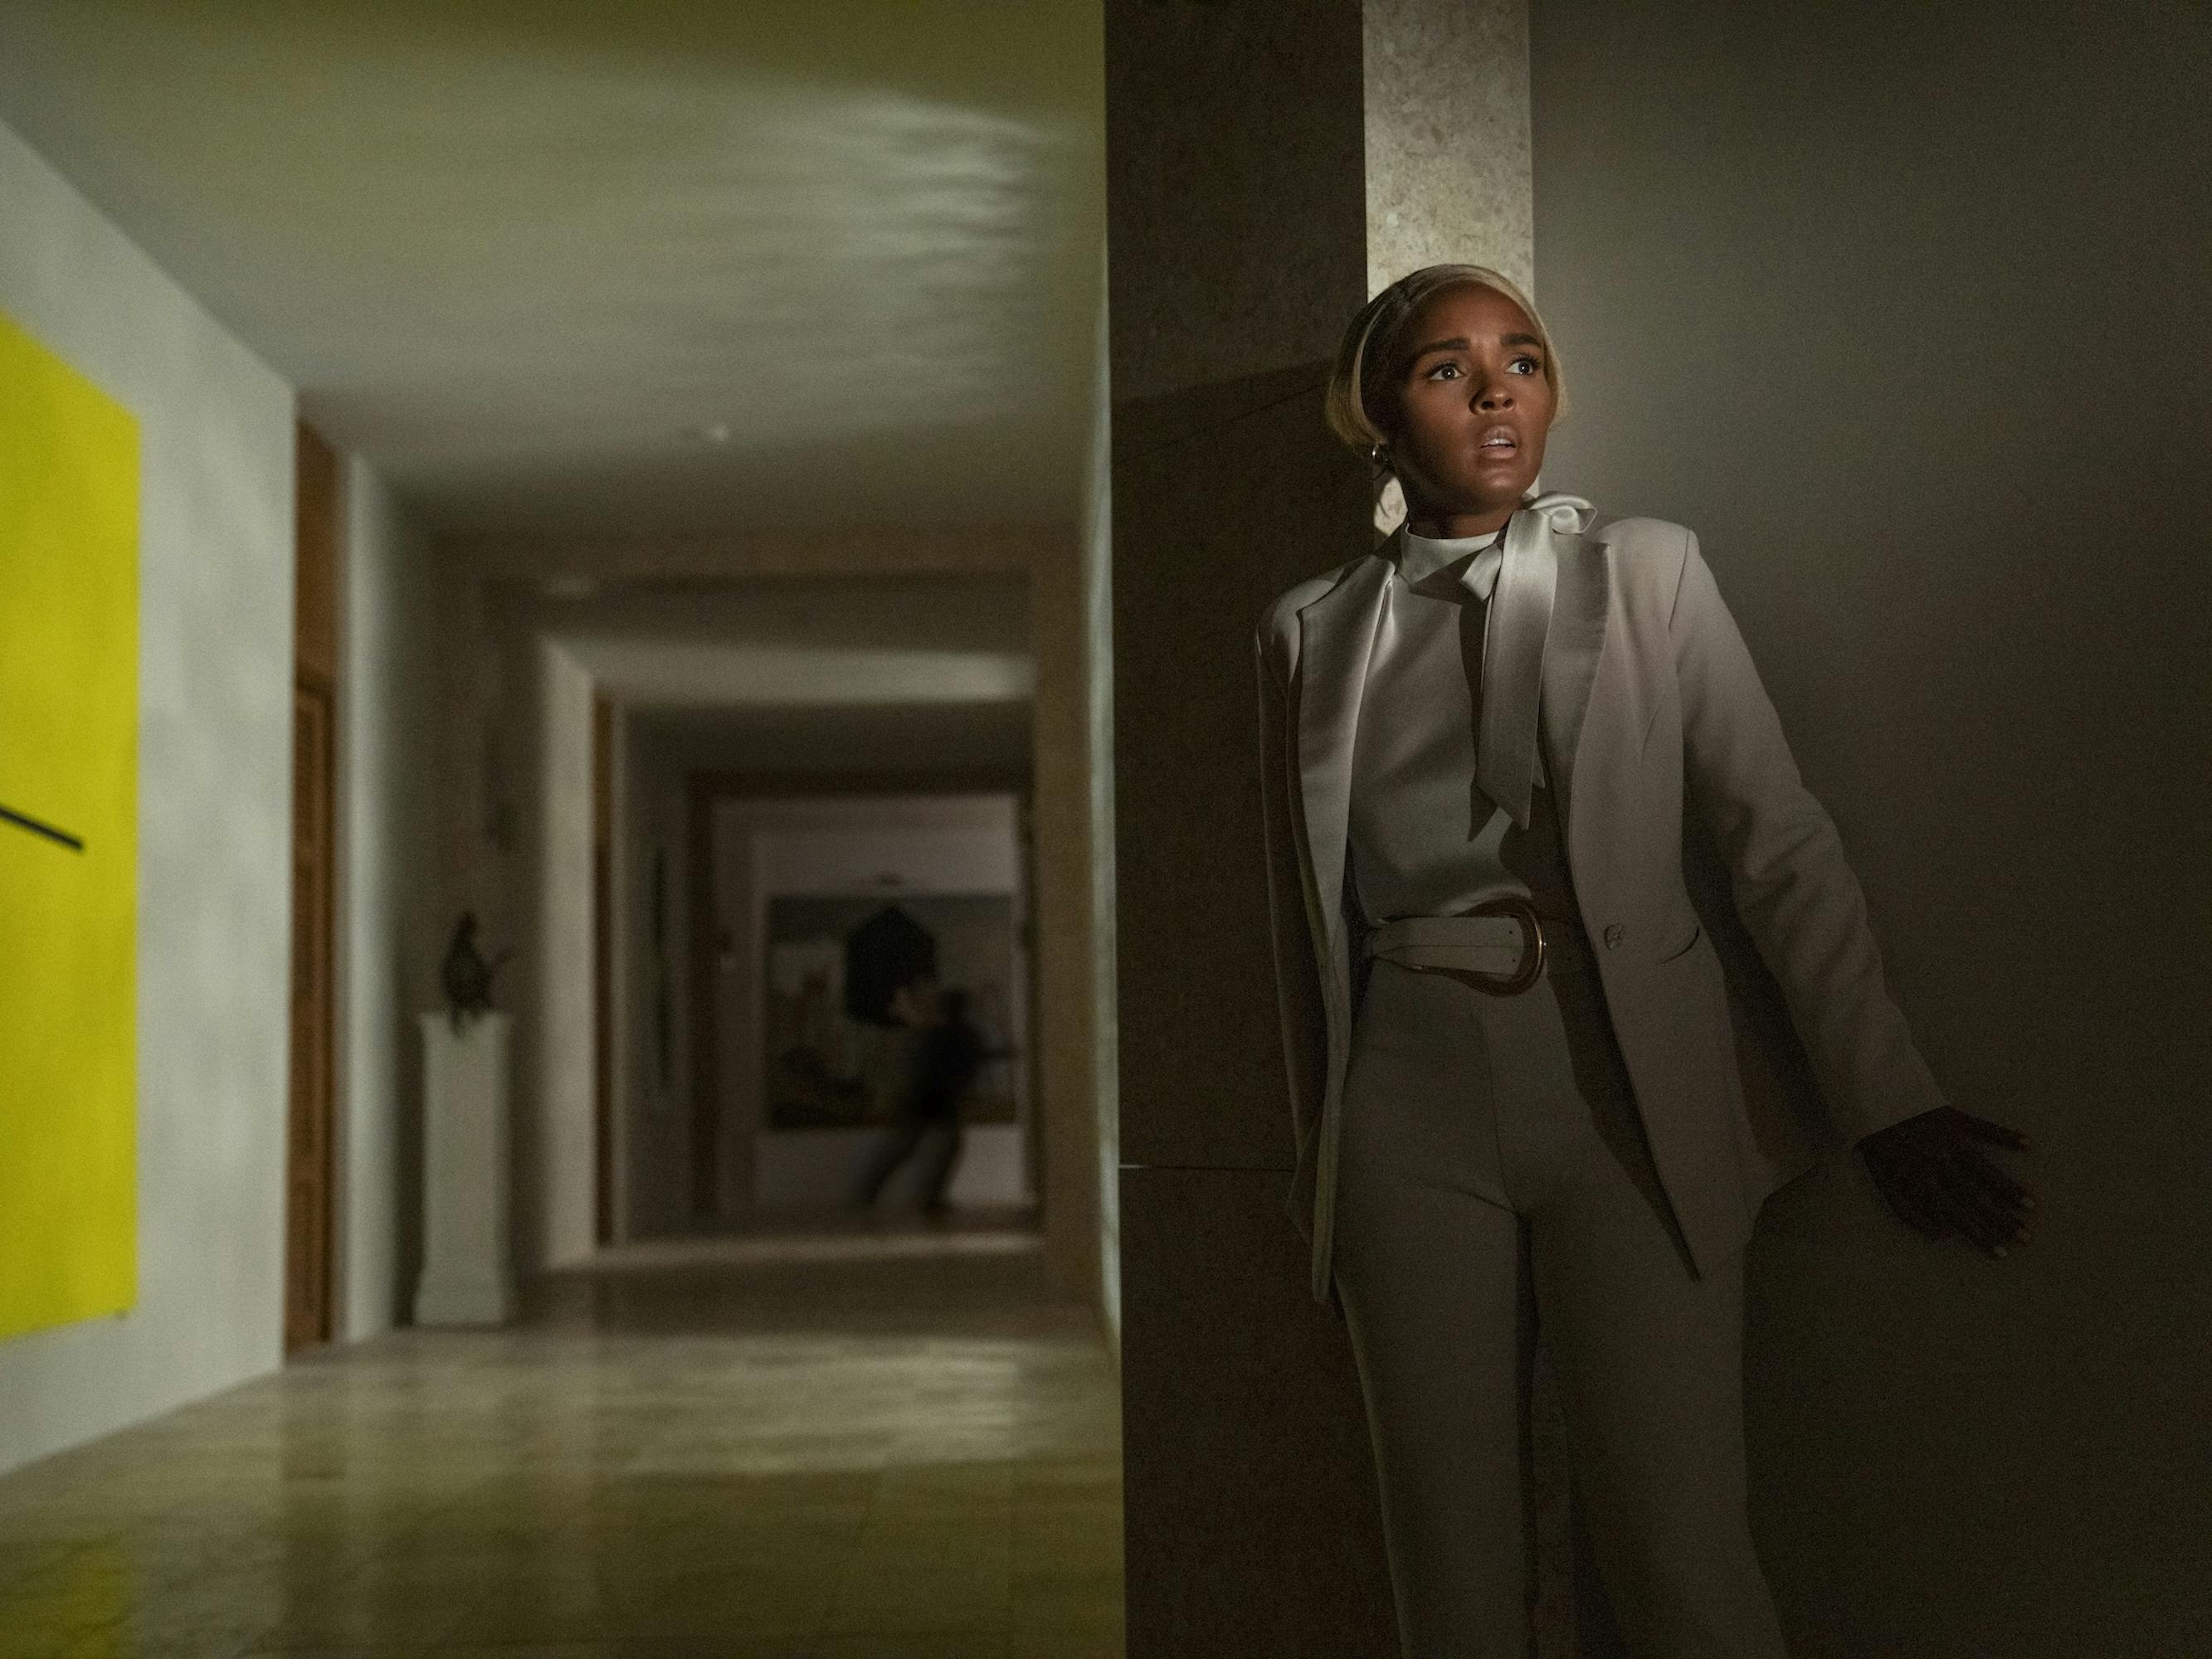 Andi Brand (Janelle Monáe) crouches behind a wall in a darkened hallway.